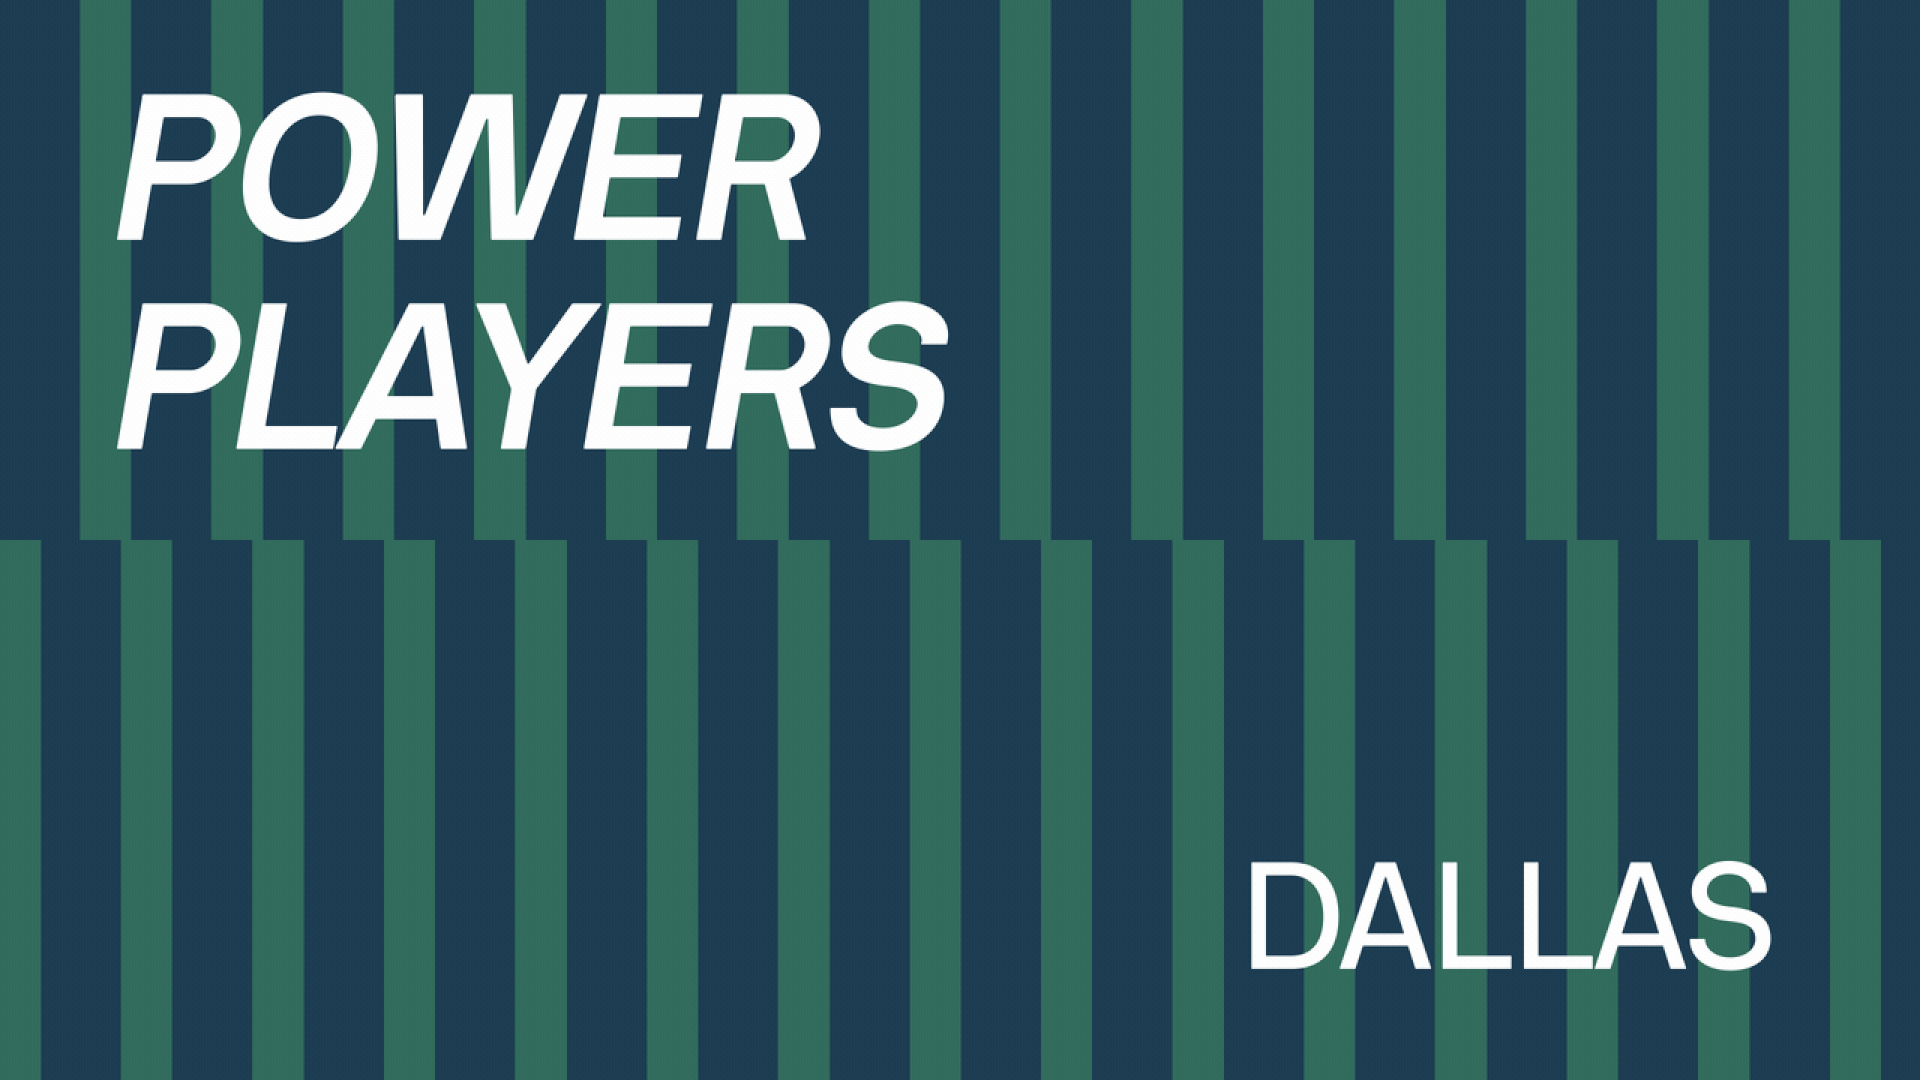 Illustration of two rows of dominos falling with text overlaid that reads Power Players Dallas.